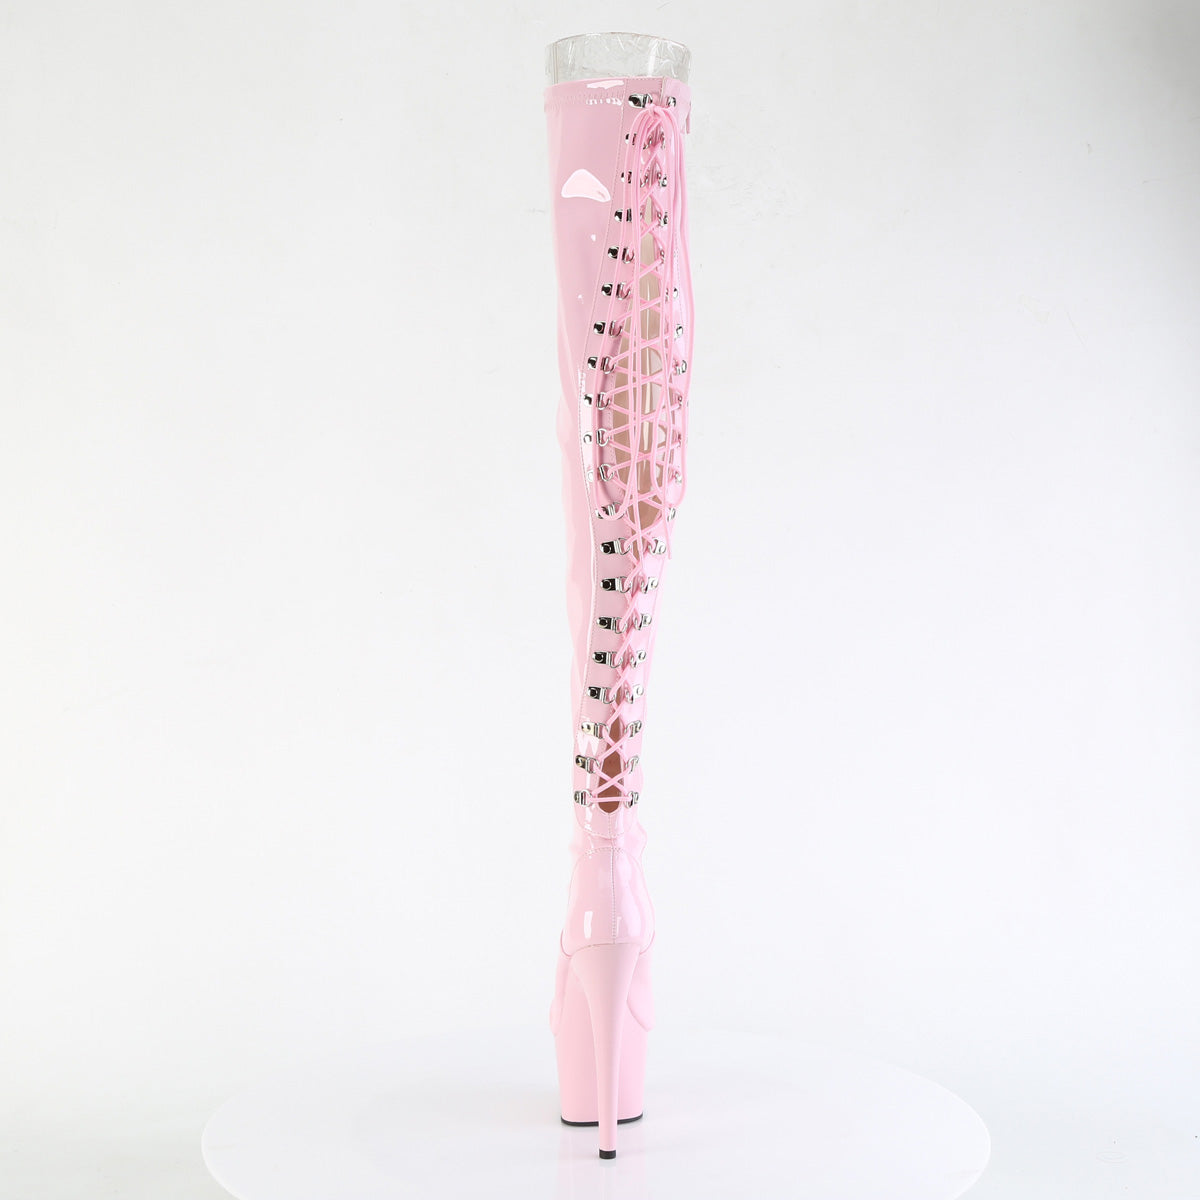 ADORE-3063 Pleaser Baby Pink Patent Exotic Dancing Thigh High Boots